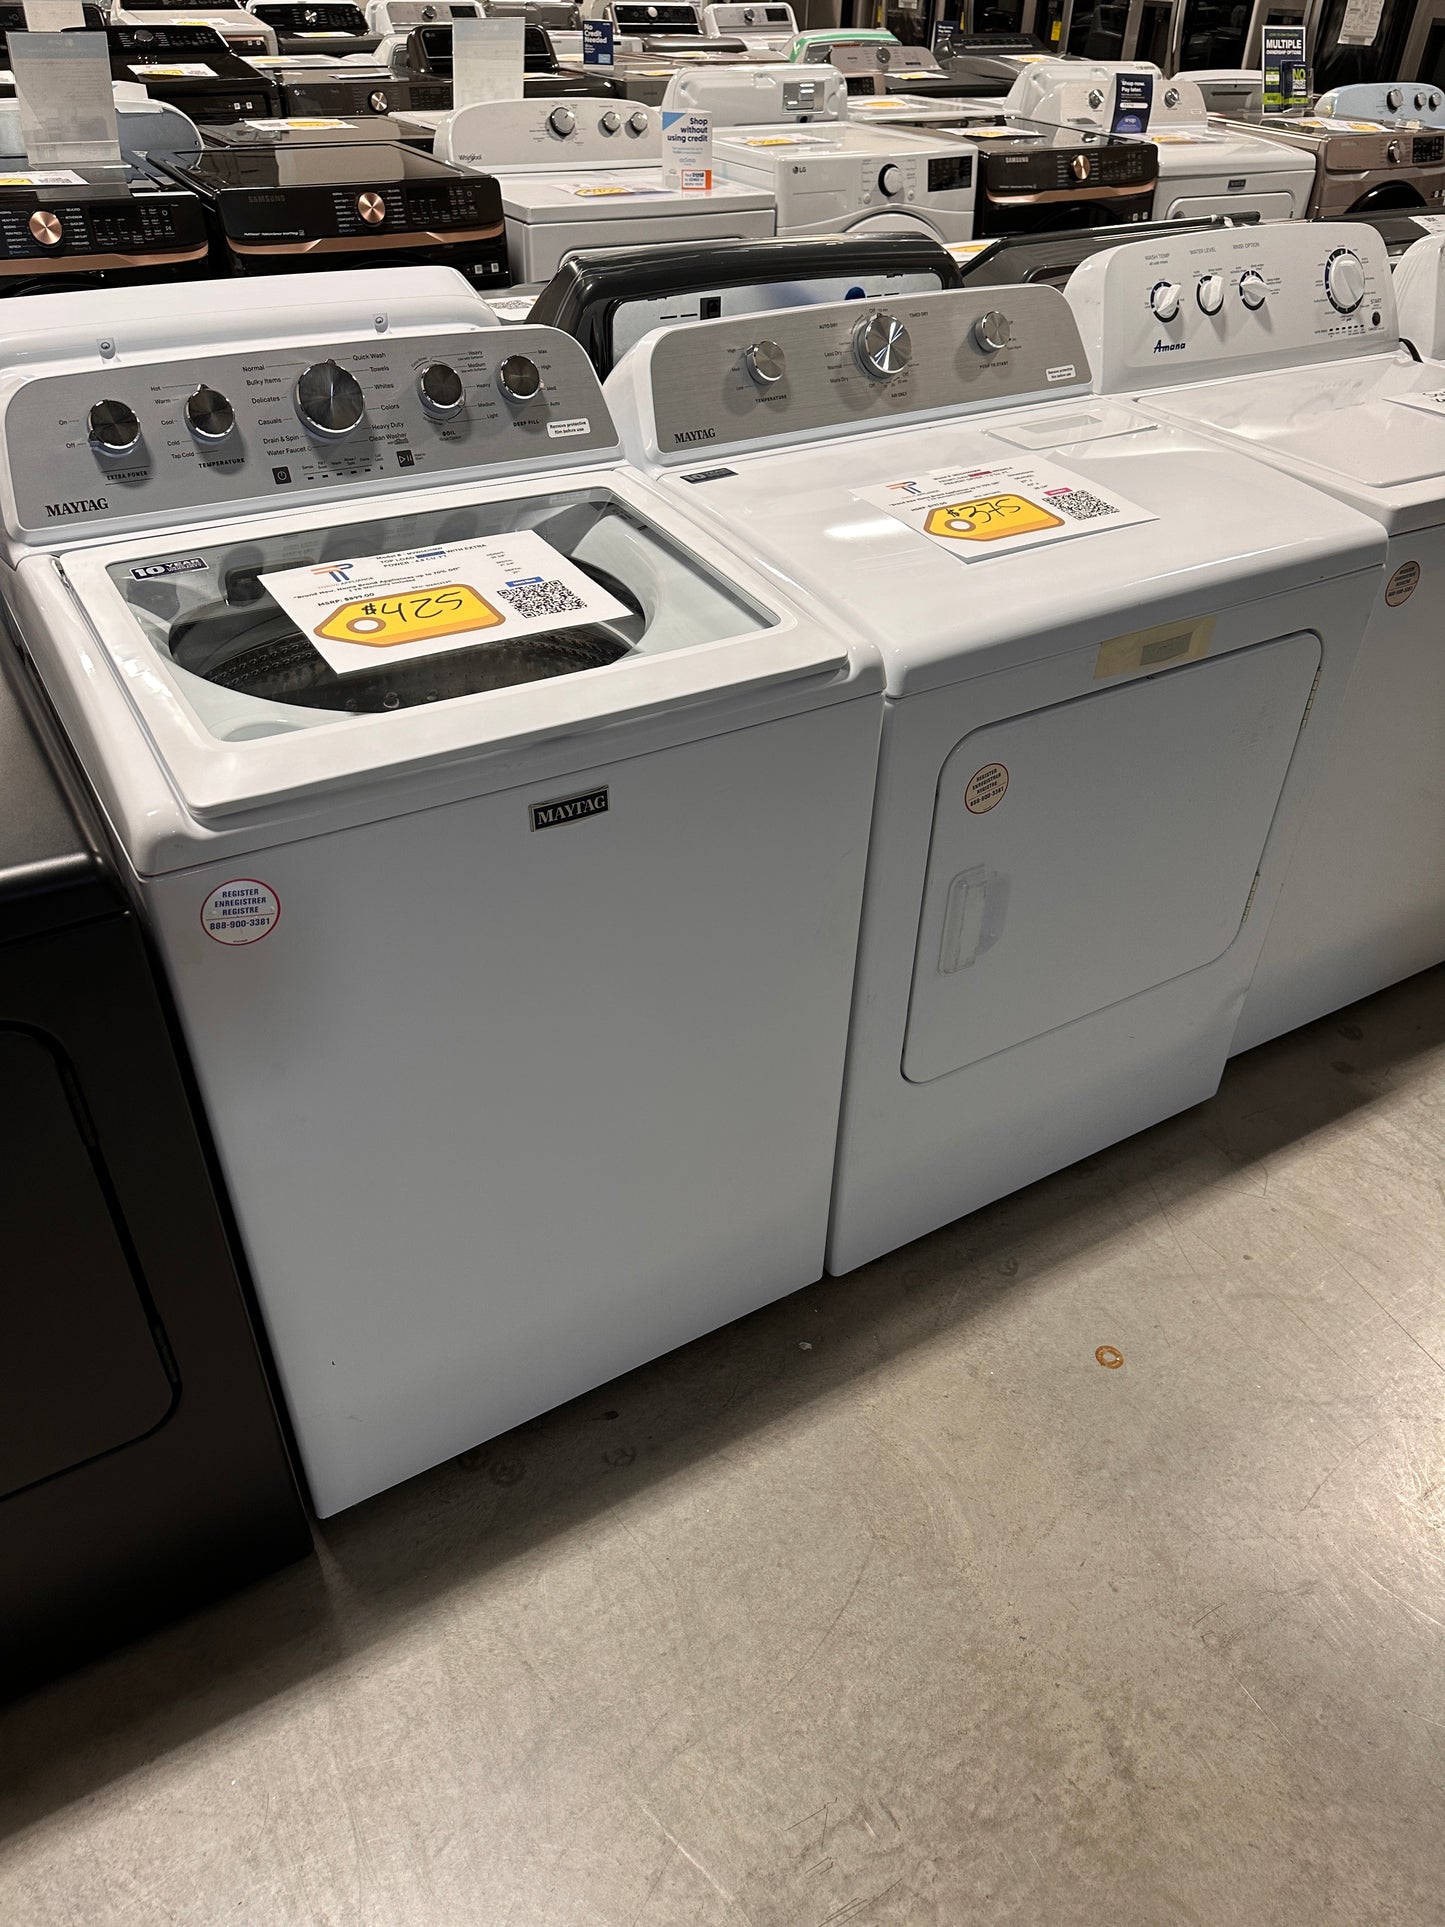 GORGEOUS TOP LOAD WASHER ELECTRIC DRYER MAYTAG LAUNDRY SET - WAS13139 DRY12450